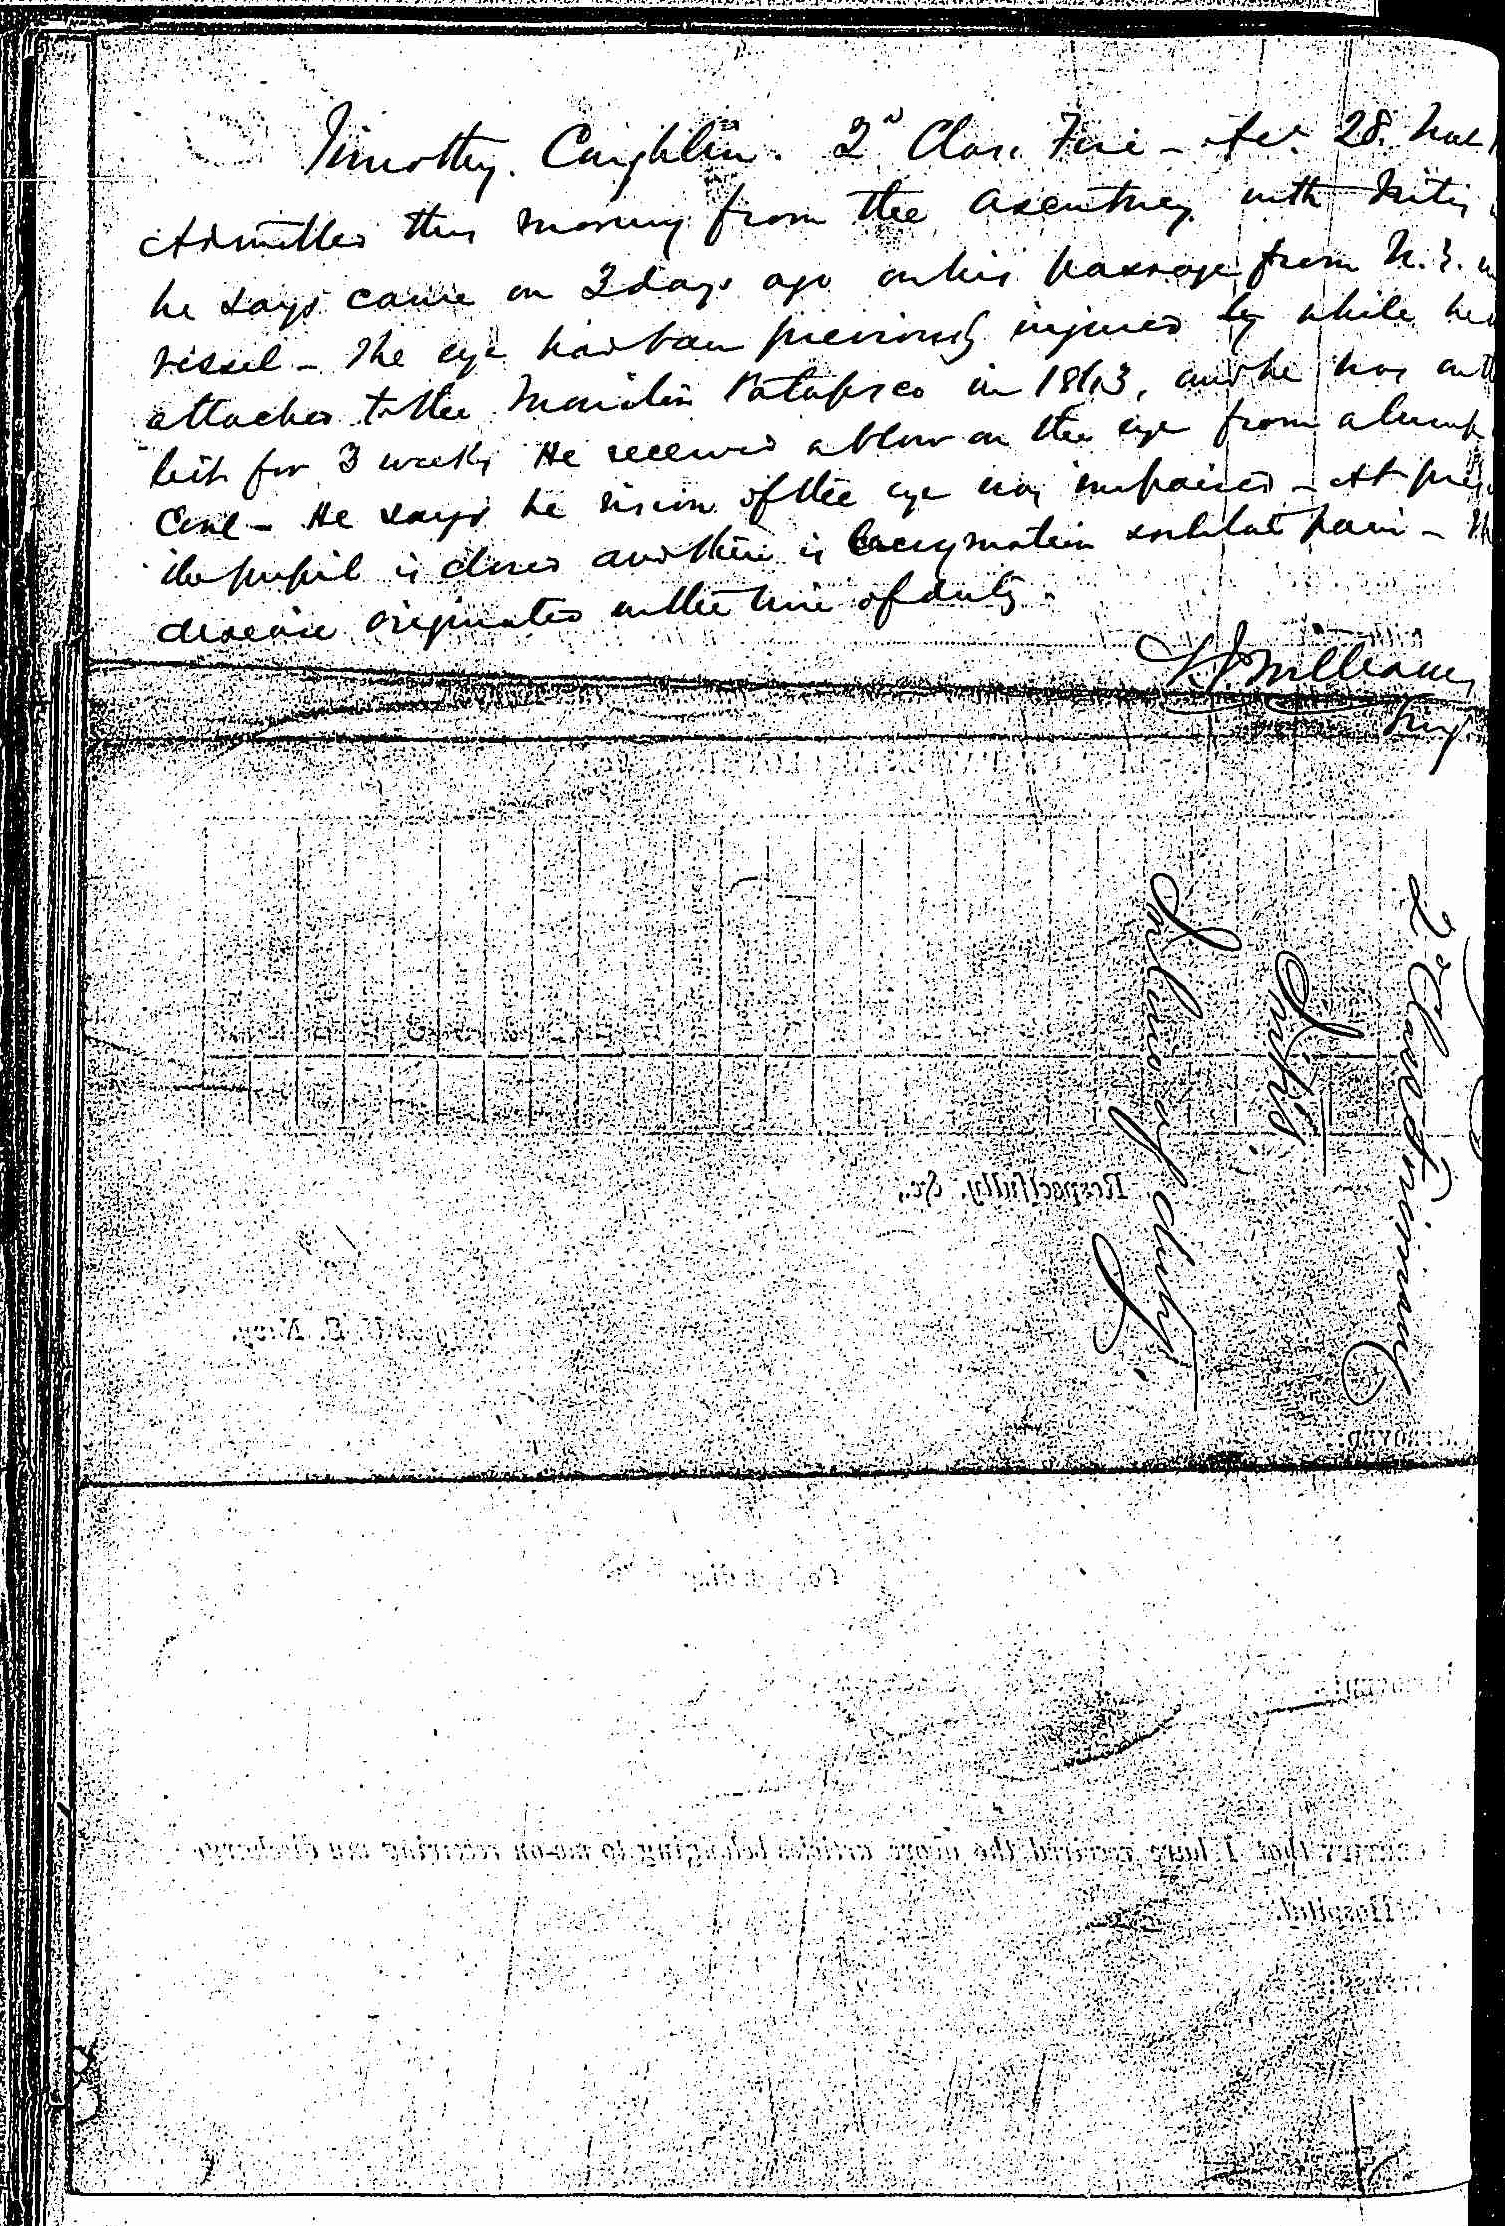 Entry for Thomas Collins (page 2 of 3) in the log Hospital Tickets and Case Papers - Naval Hospital - Washington, D.C. - 1865-68